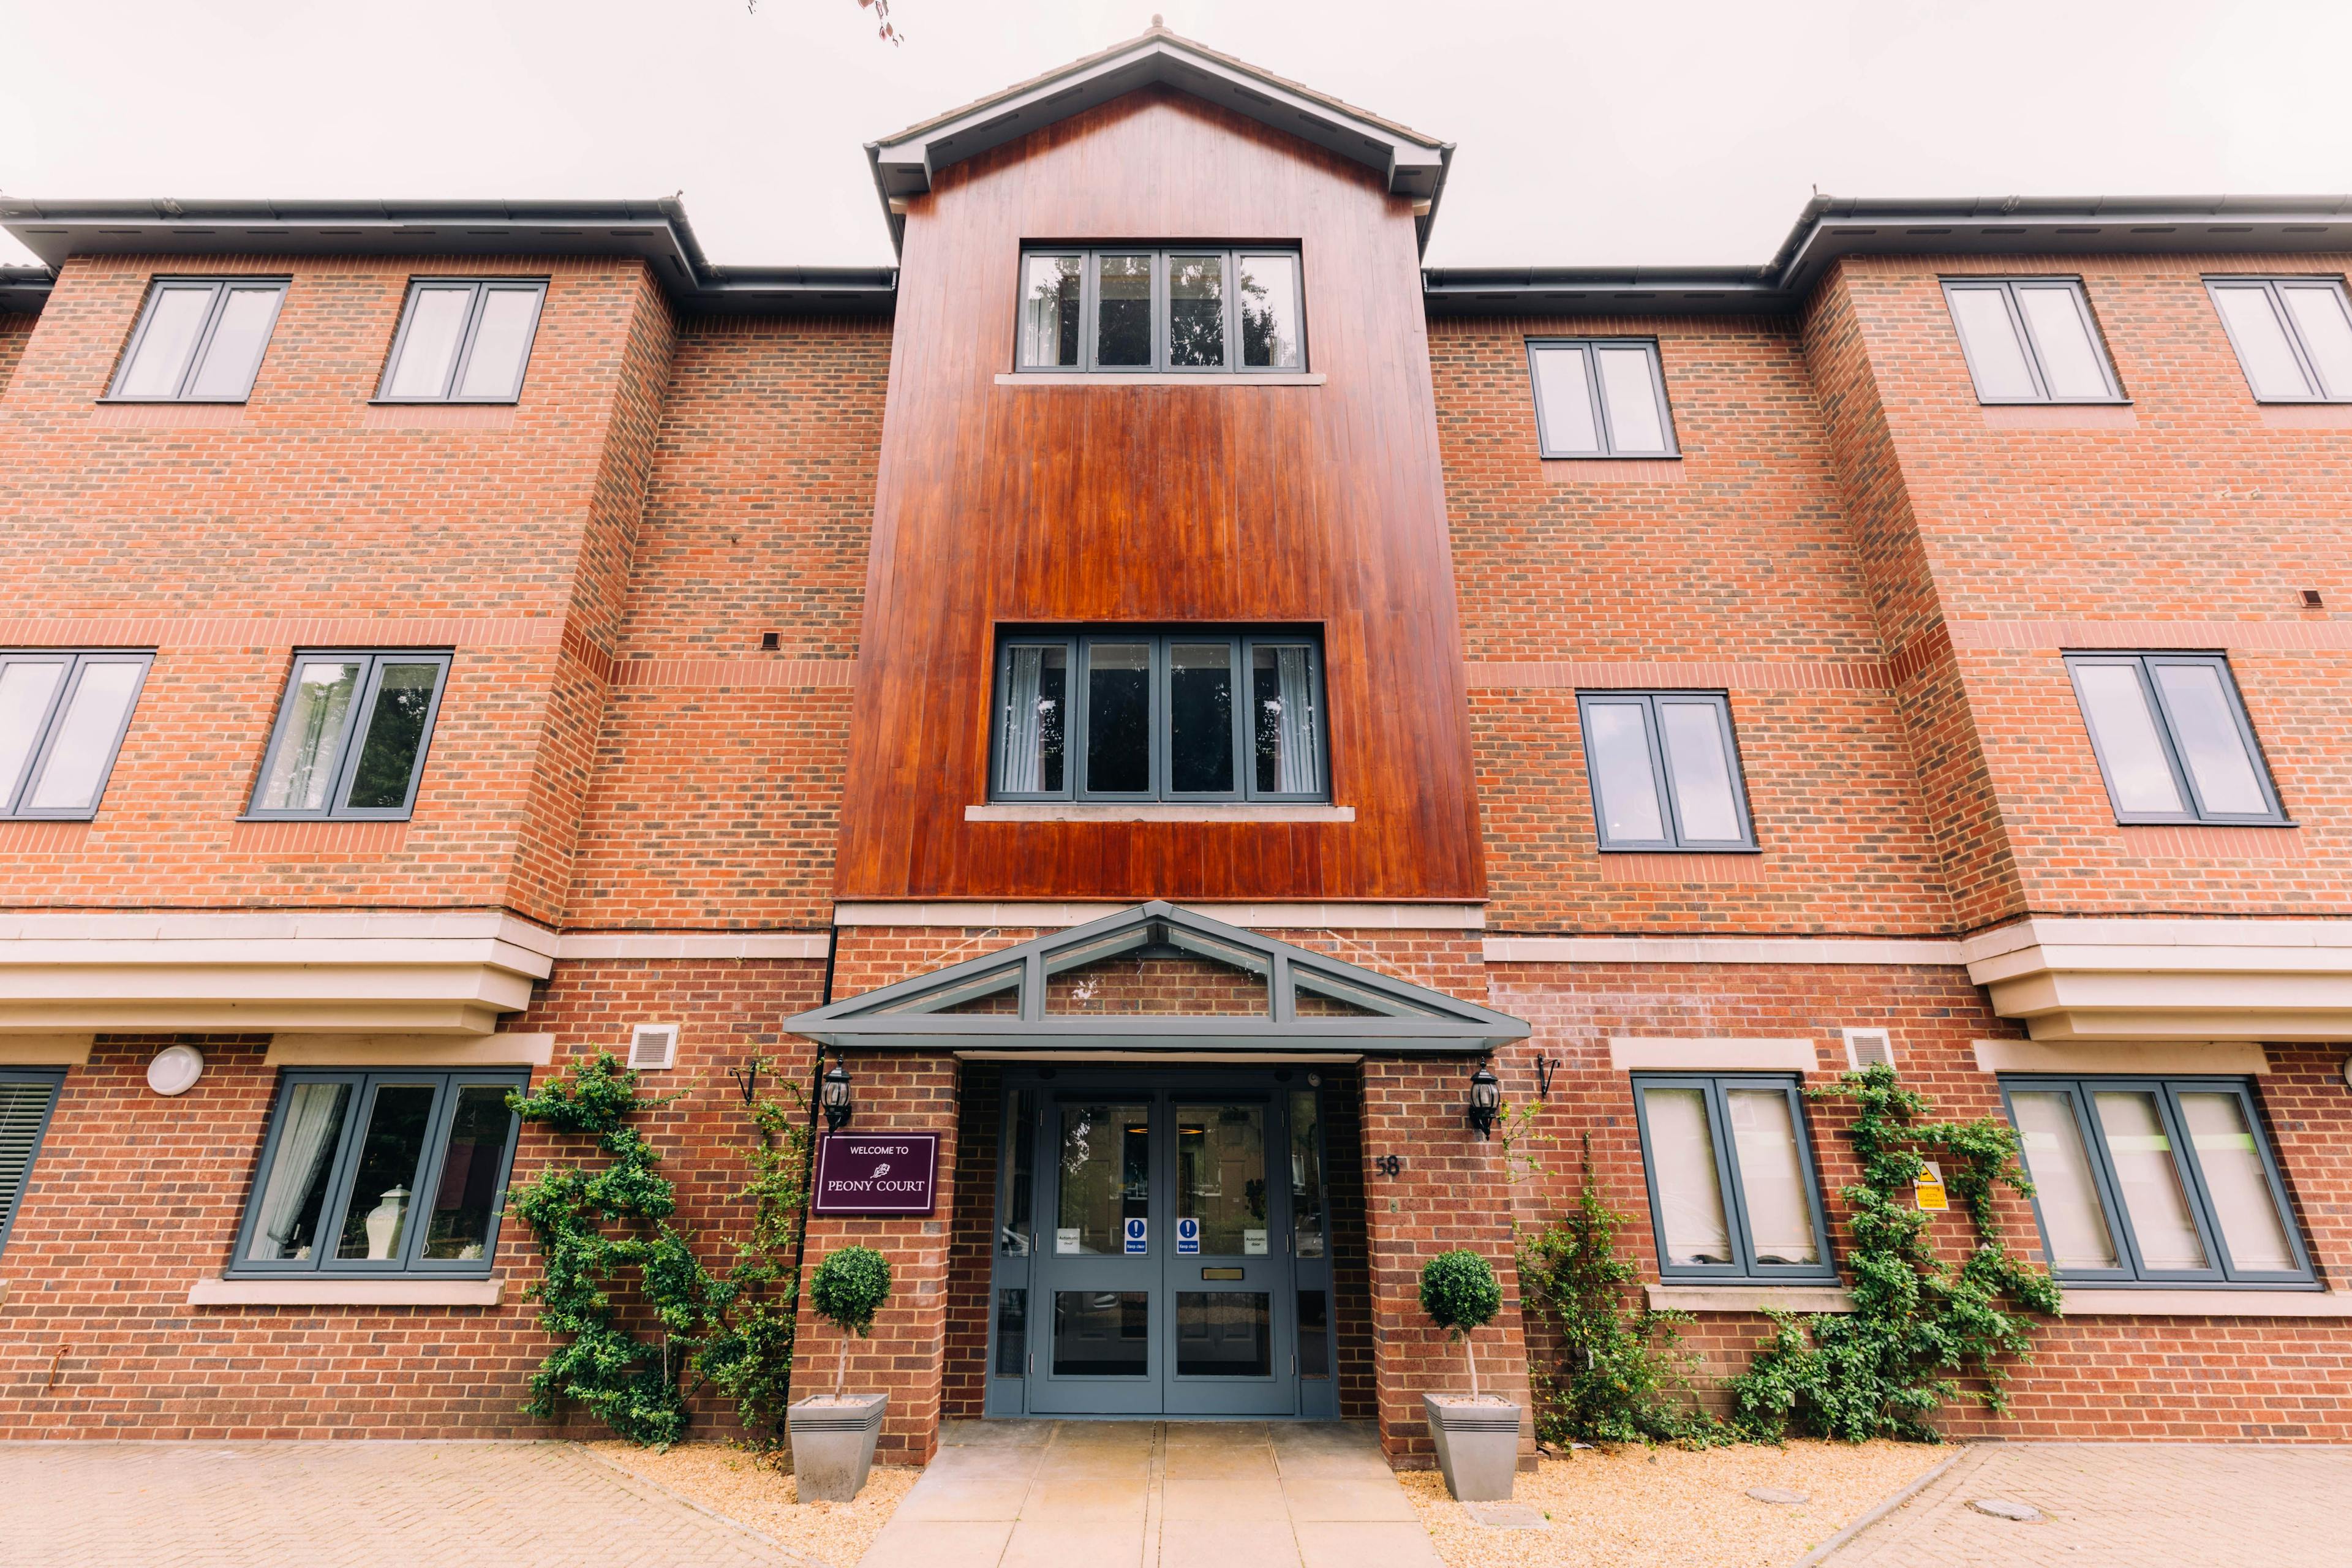 Exterior of Peony Court Care Home in Croydon, Greater London